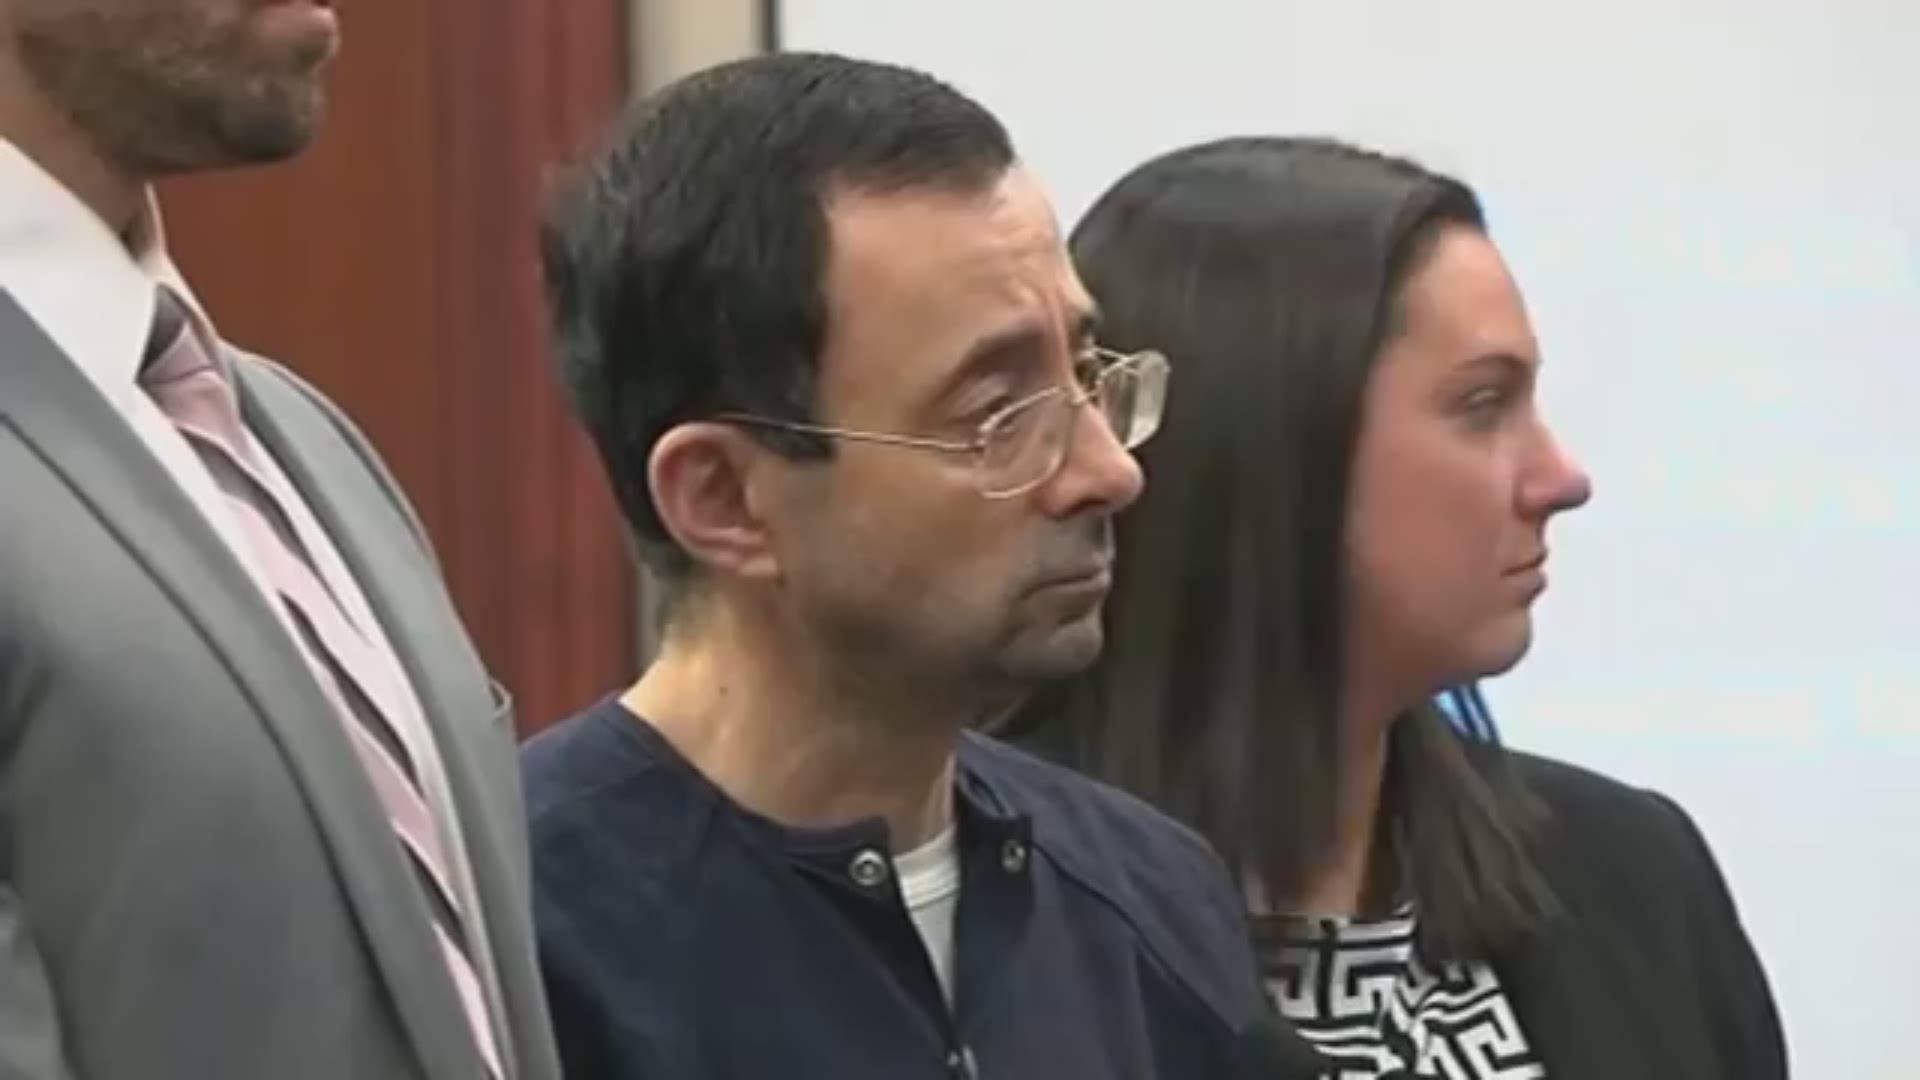 Judge Rosemarie Aquilina sentenced Larry Nassar to 40 to 175 years in prison on the seventh day of a remarkable hearing that has given the girls, young women and their parents a chance to confront Nassar in court. "I just signed your death warrant," A